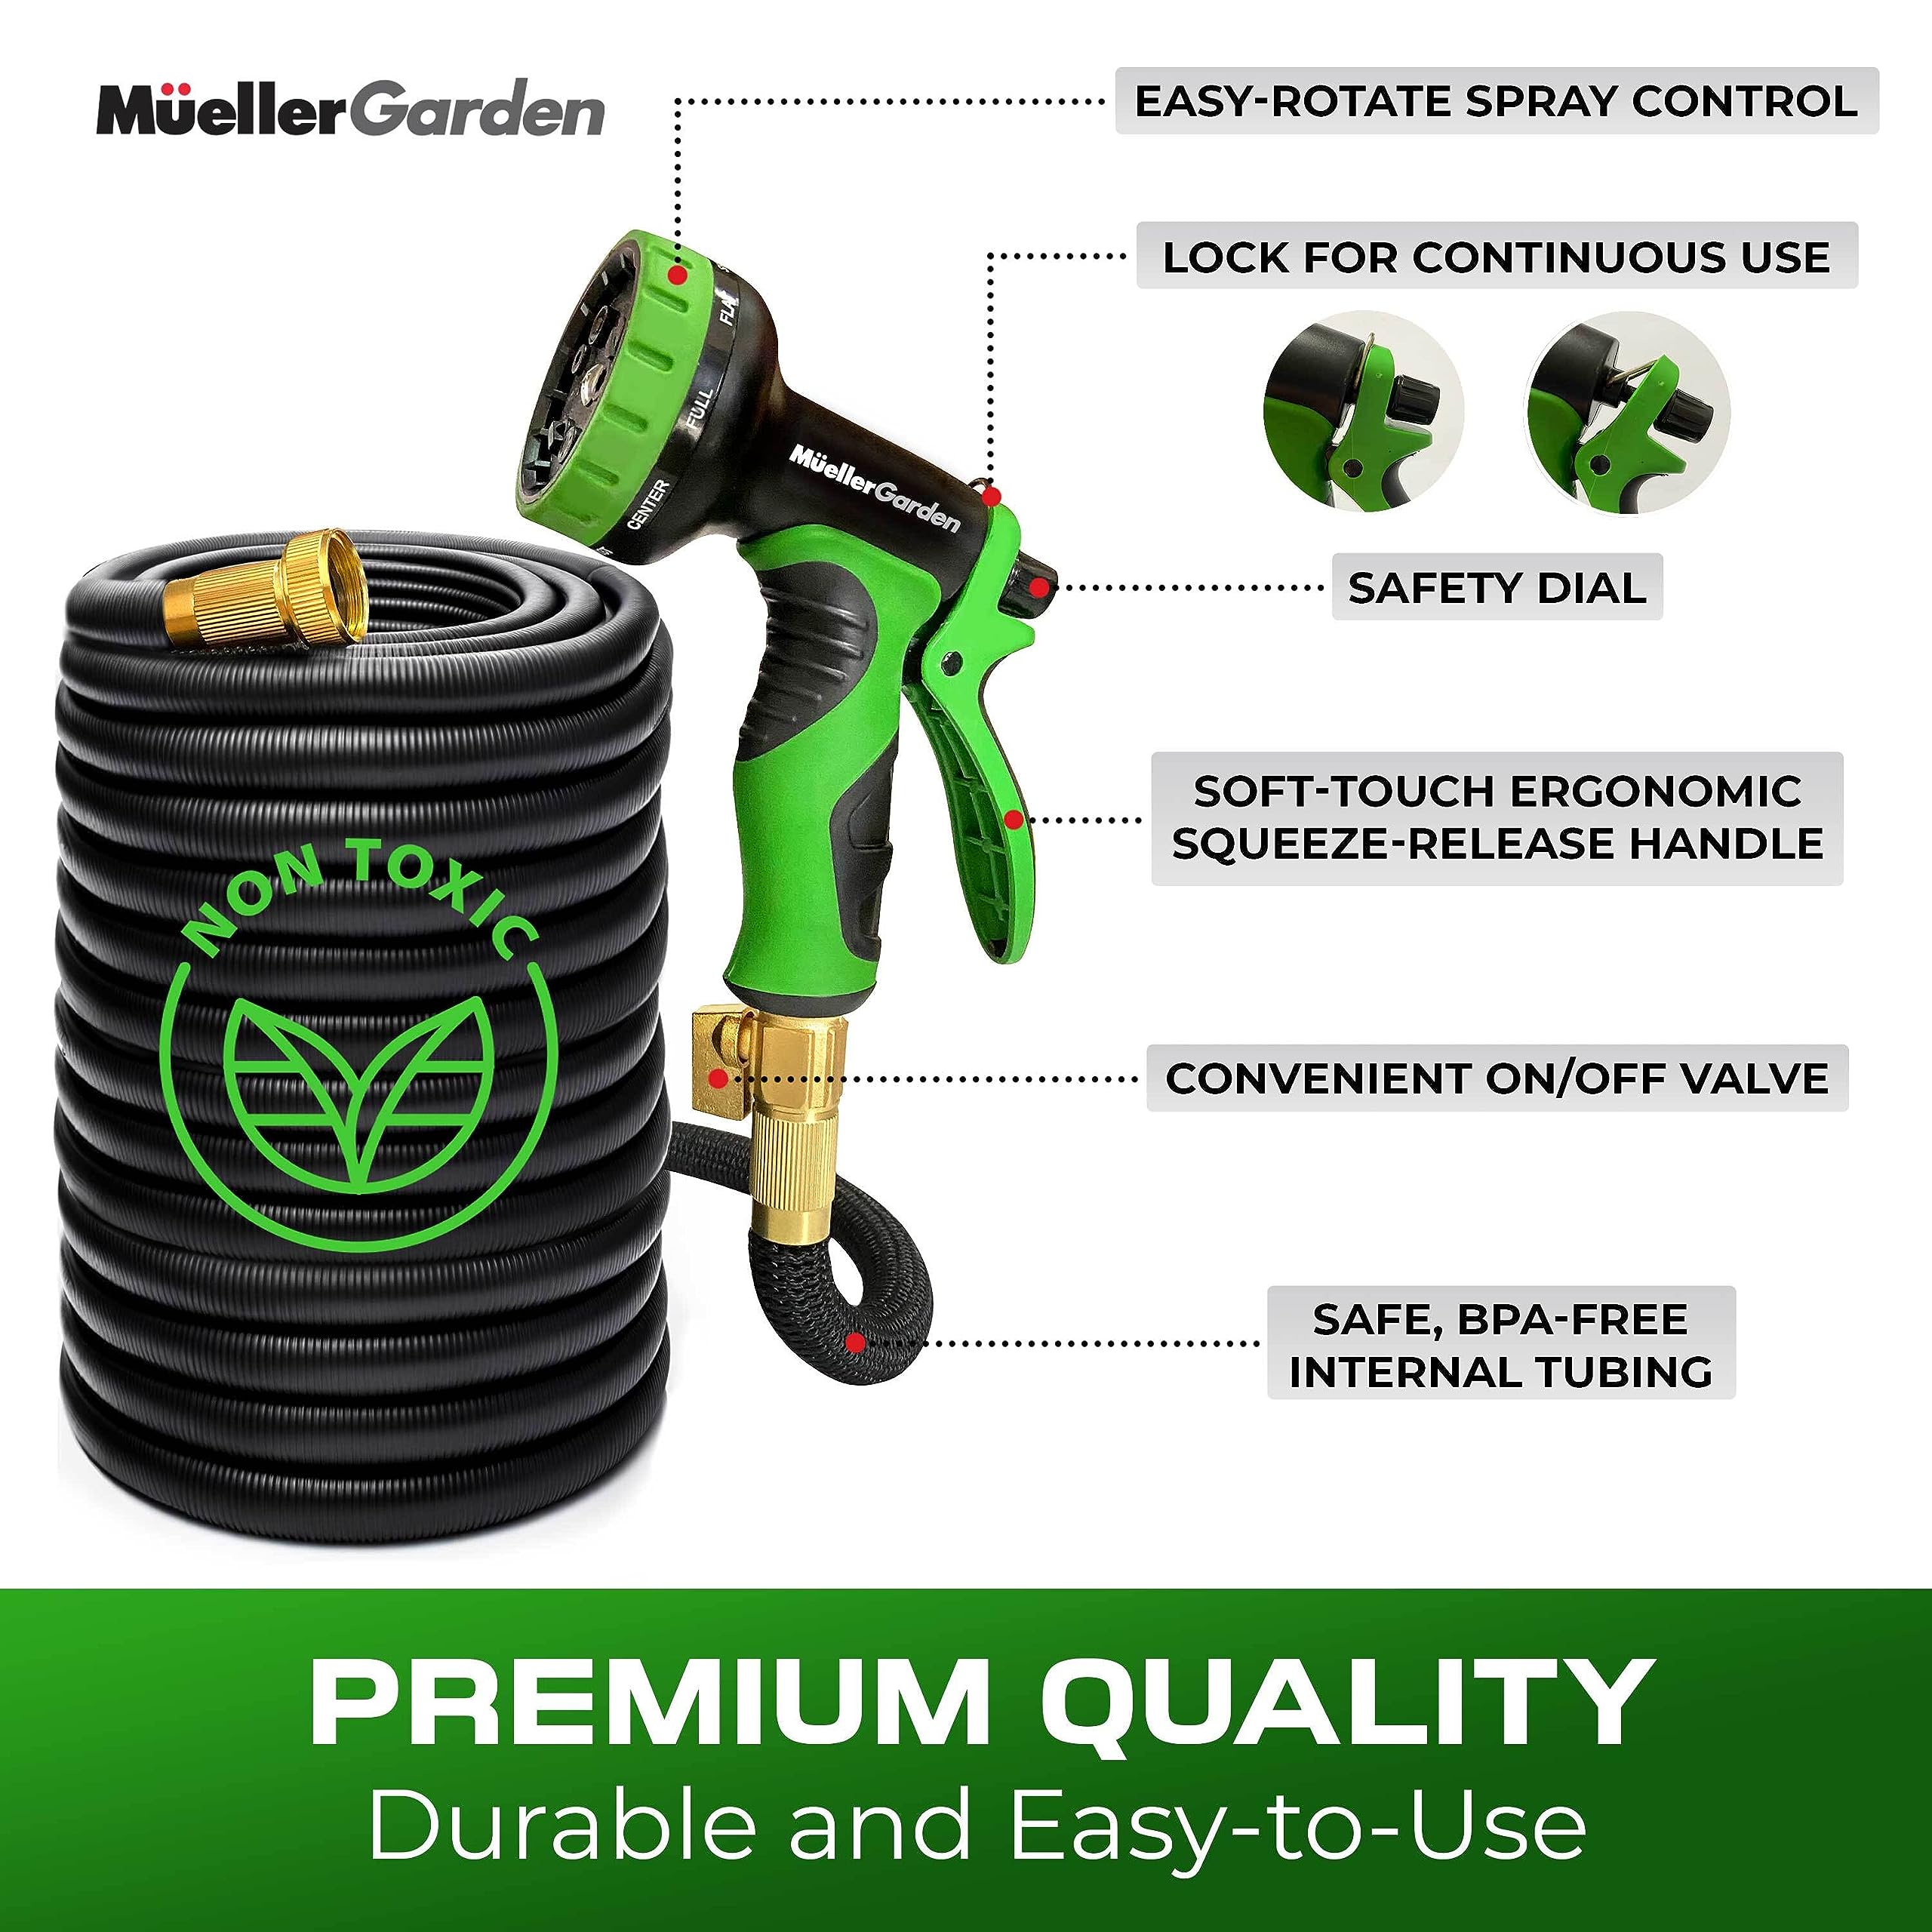 Janska by Mueller Expandable Garden Hose 50 ft. Flexible & Lightweight Garden Hose that Extends and Retracts, Kink and Tangle Resistant, with 9 Function Spray Nozzle